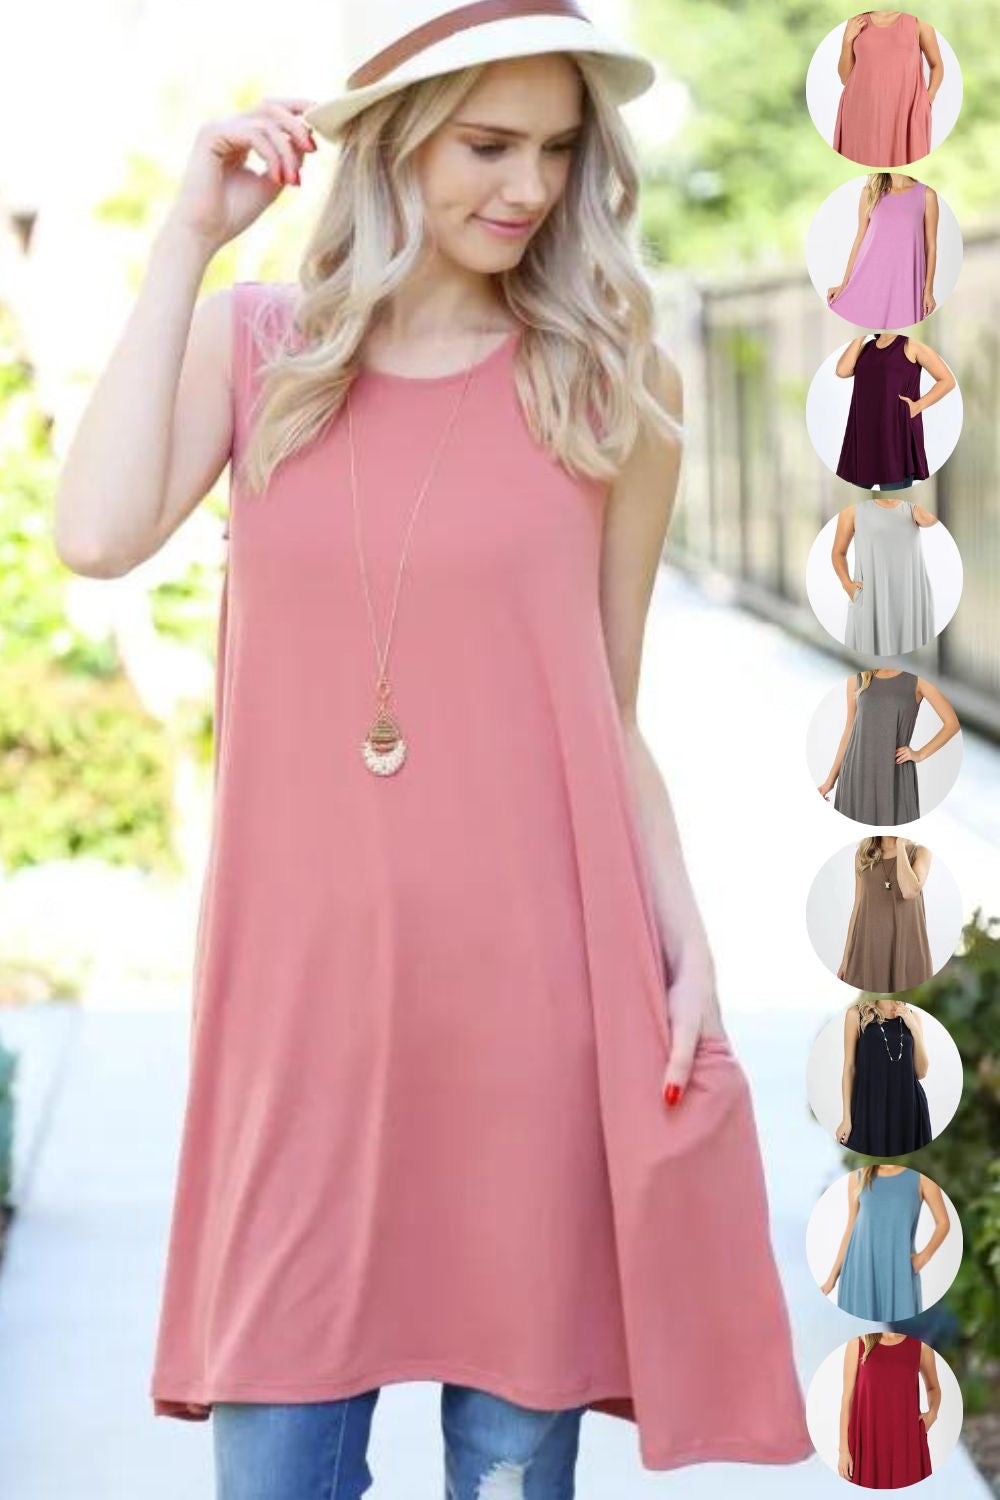 Woman modeling the Cinderella Scoop Neck Tunic Tank with Pockets available in 9 colors in sizes to fit every woman Small to 3XL. Can be worn as a Dress or as a Tunic Top Shirt. 